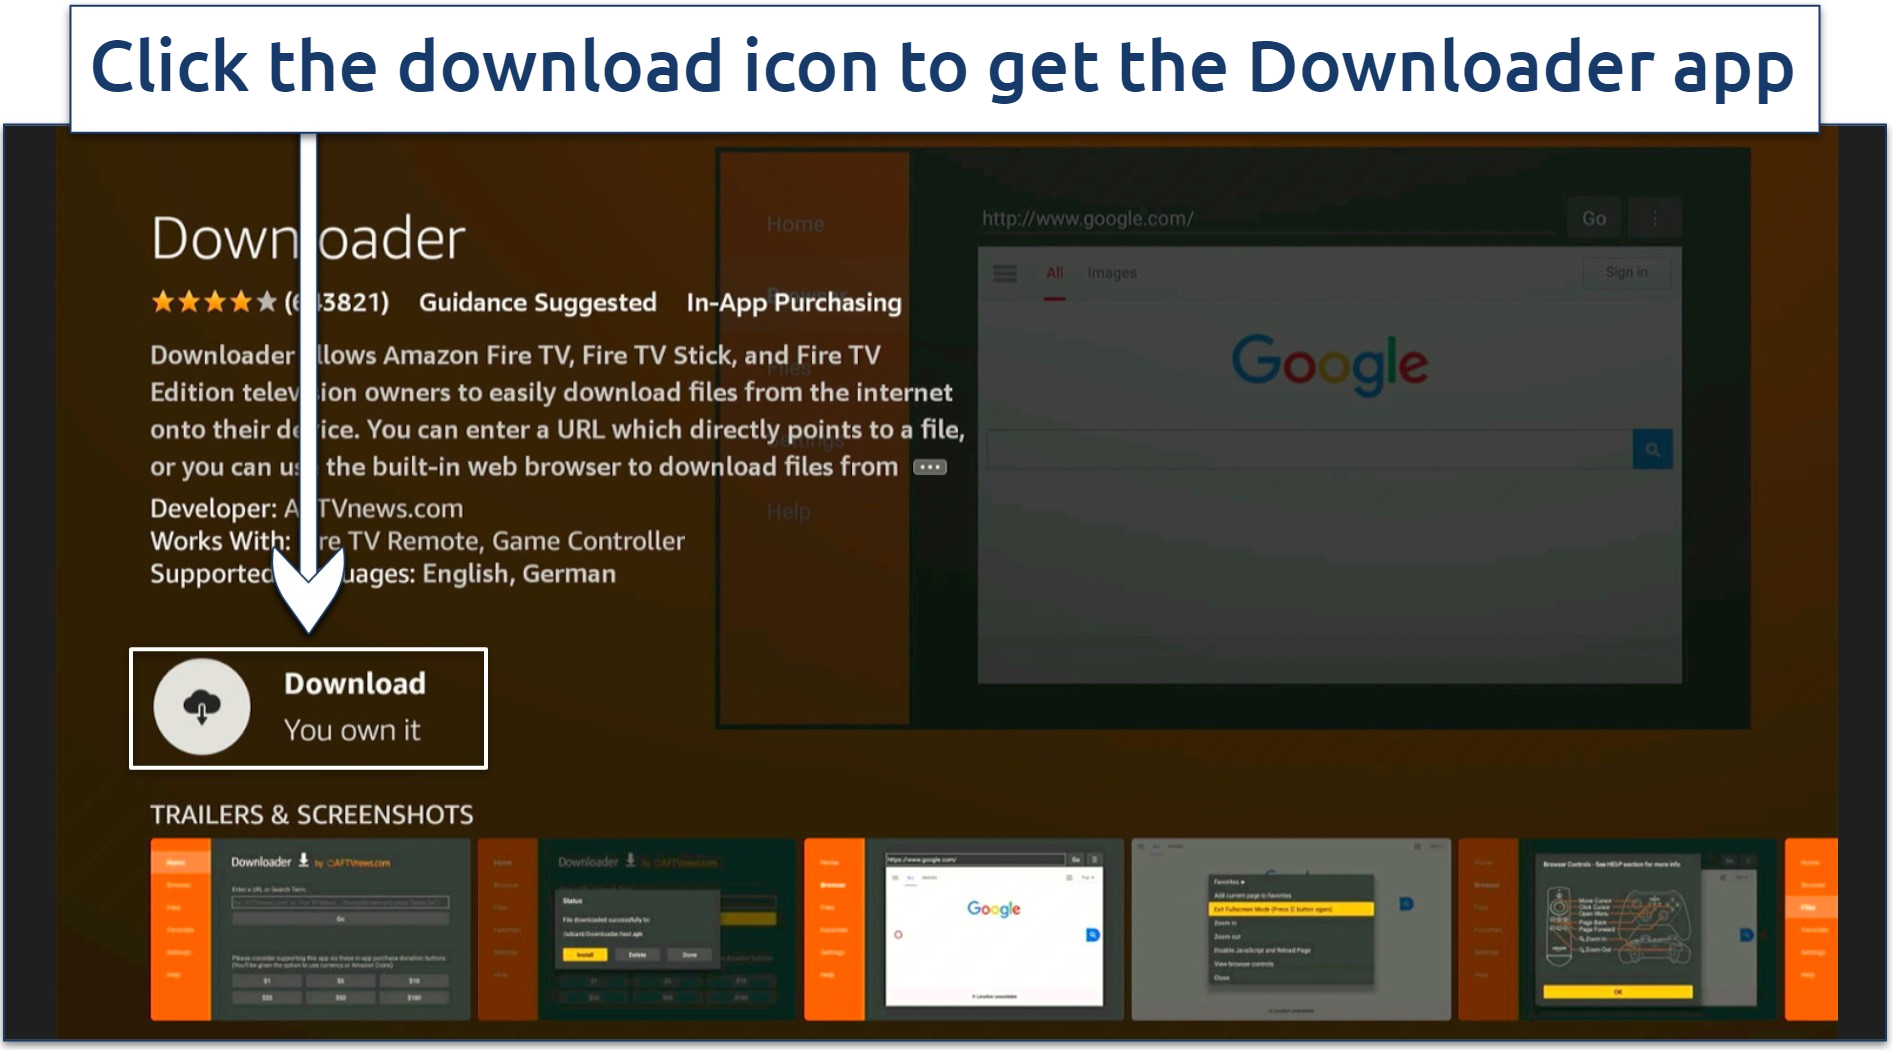 A screenshot showing how to download the Downloader app from Amazon Appstore